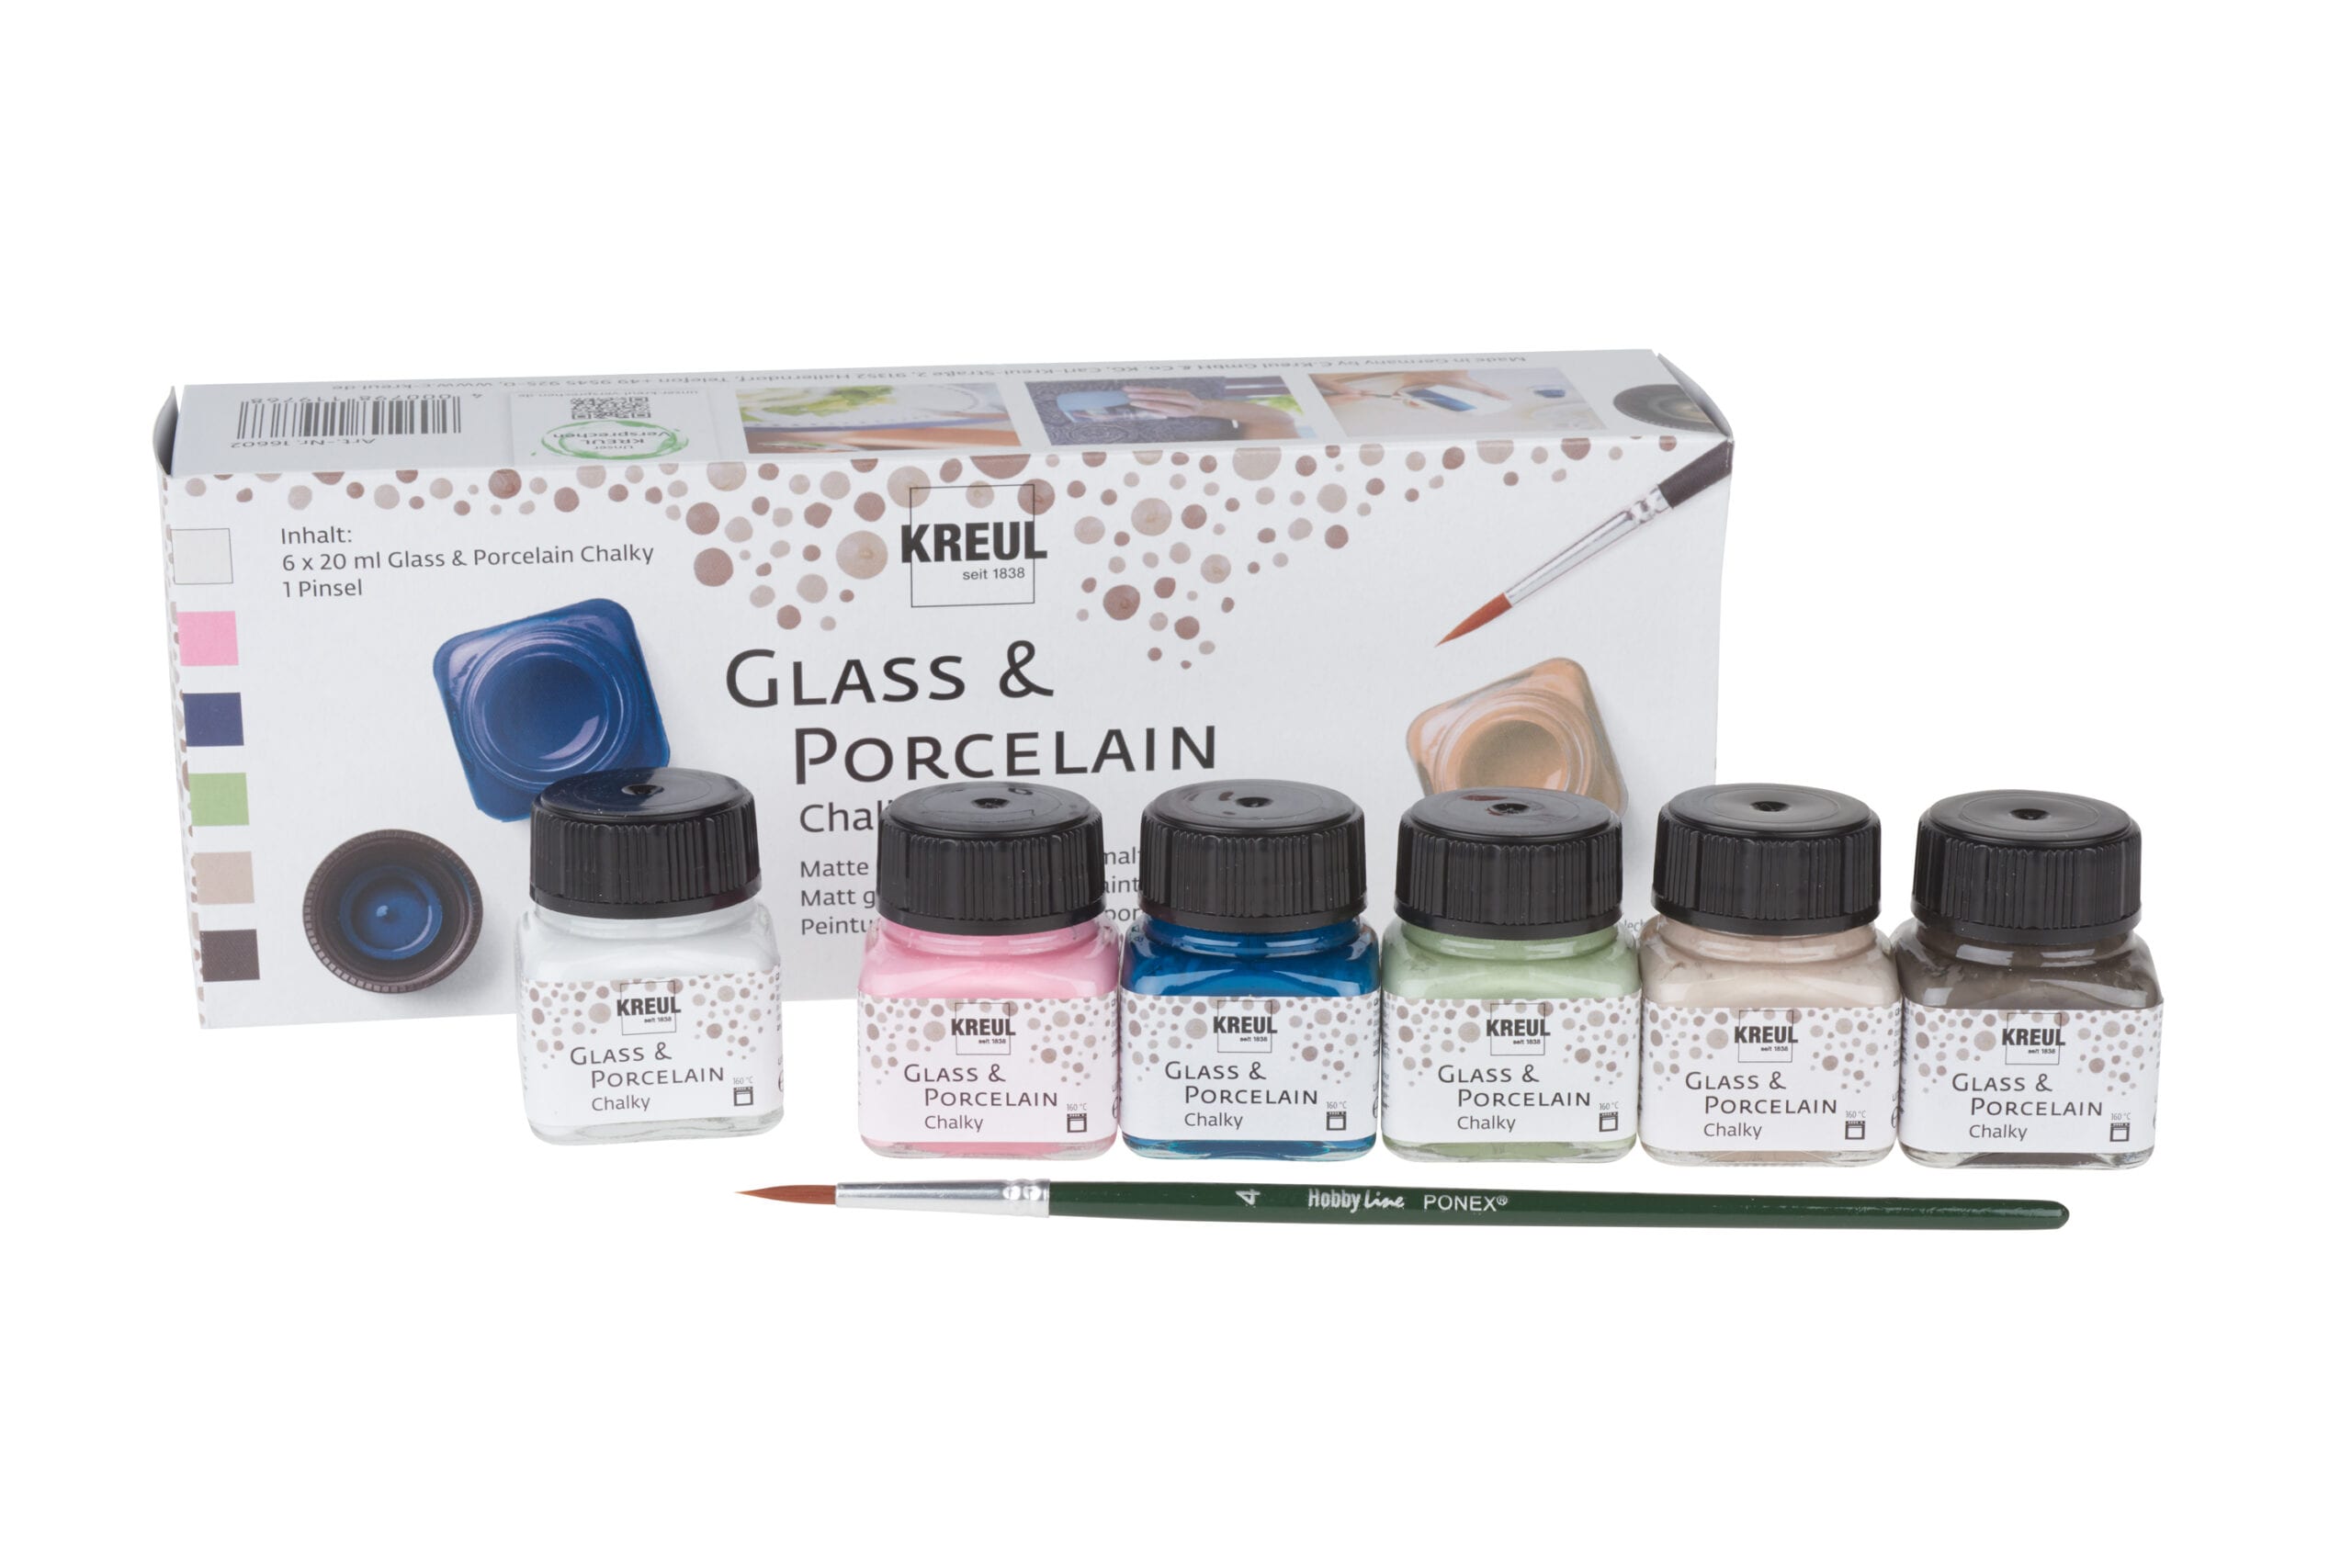 Porcelan & Glass Chalky gesso